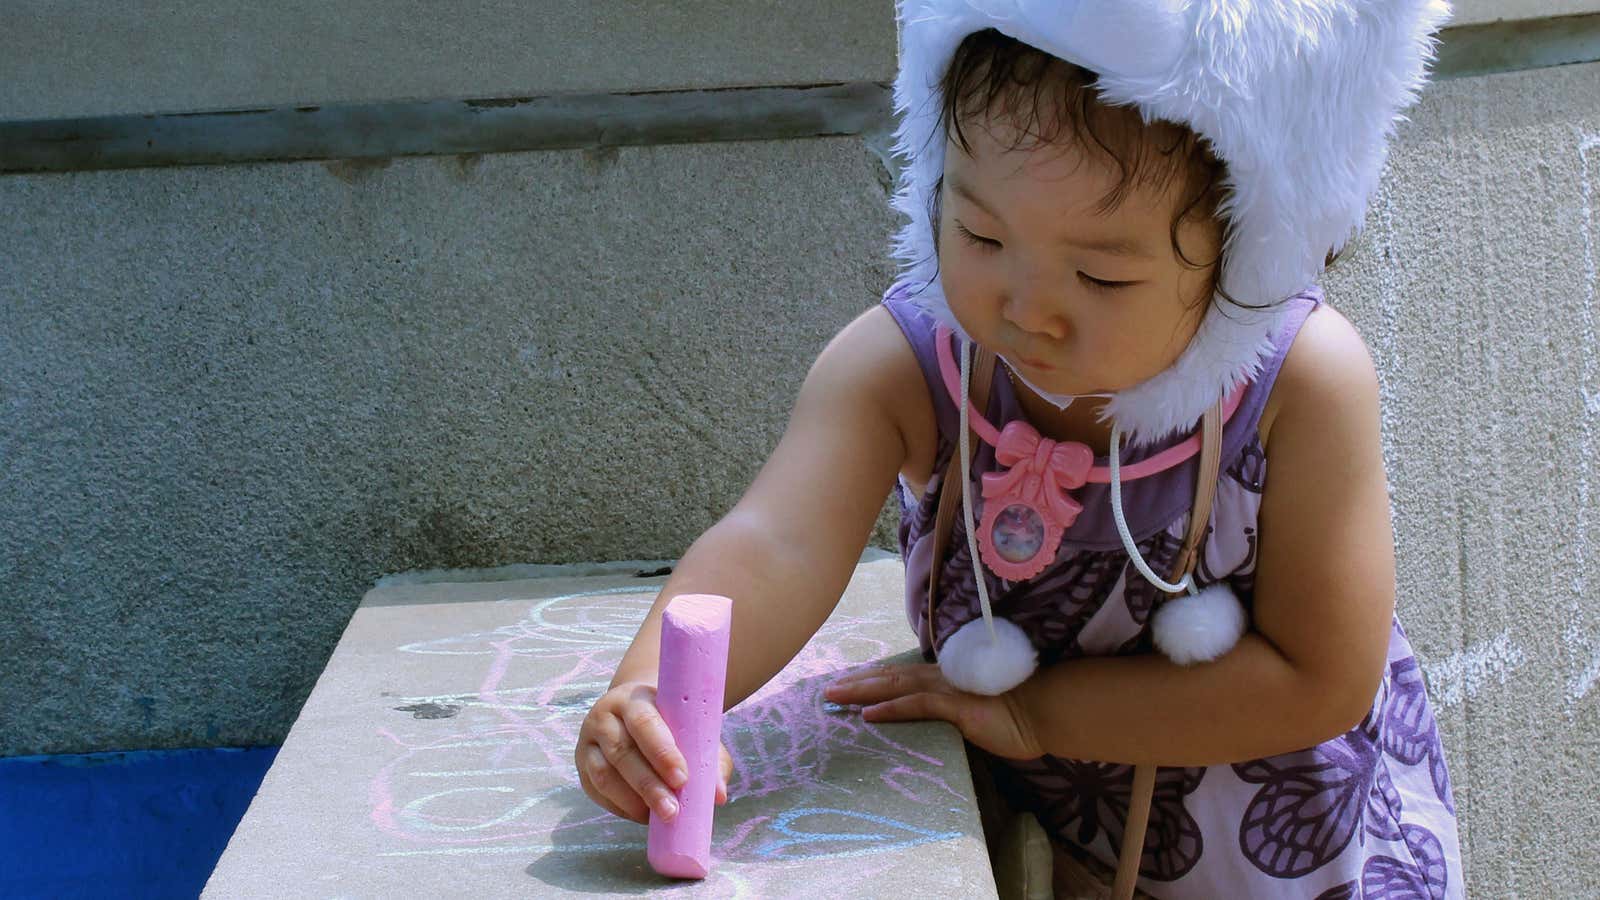 Chalk art is a tradition that goes way, way back.